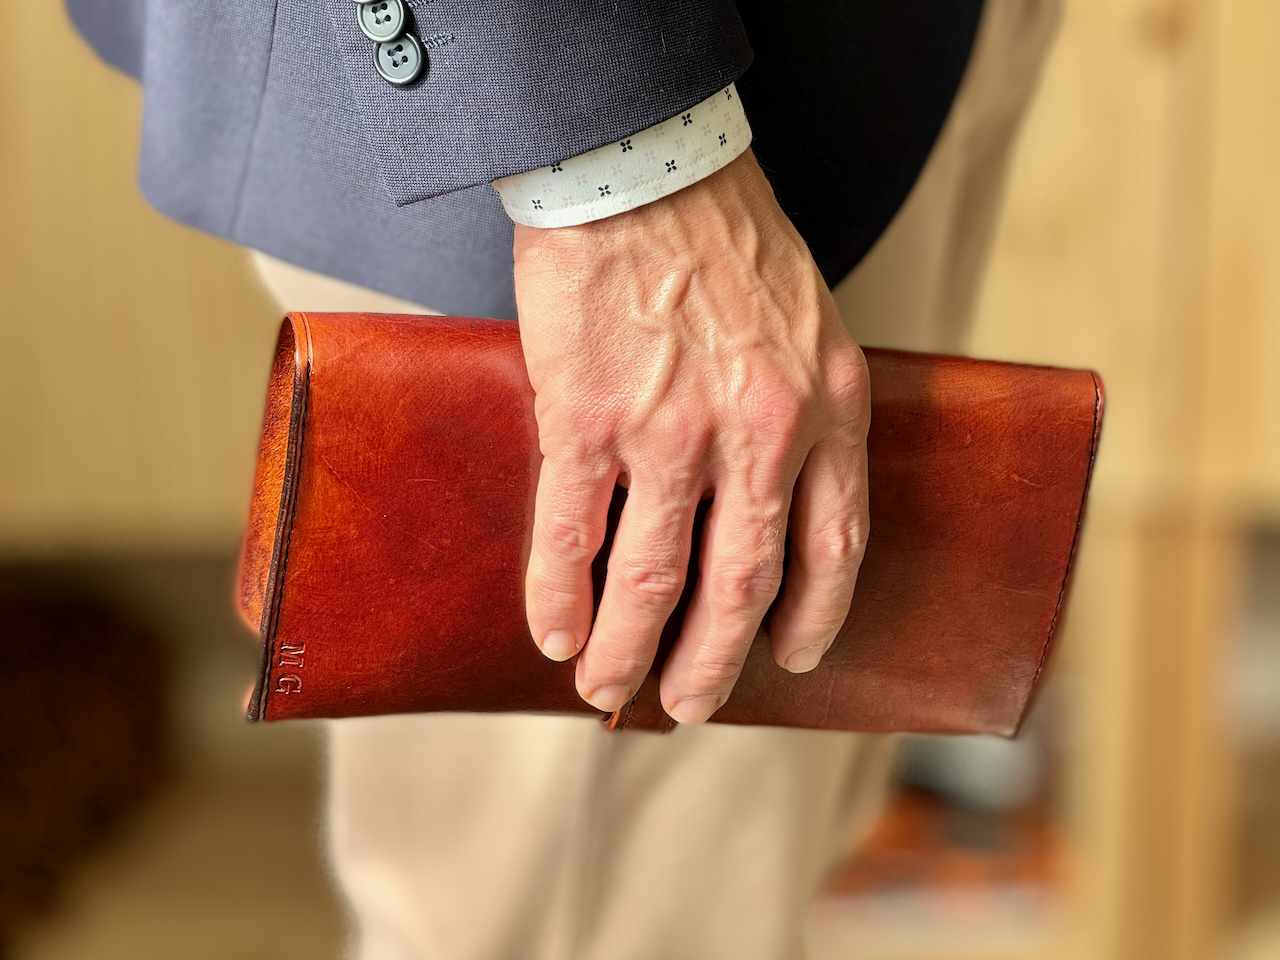 Leather boveda cigar case being held in hand